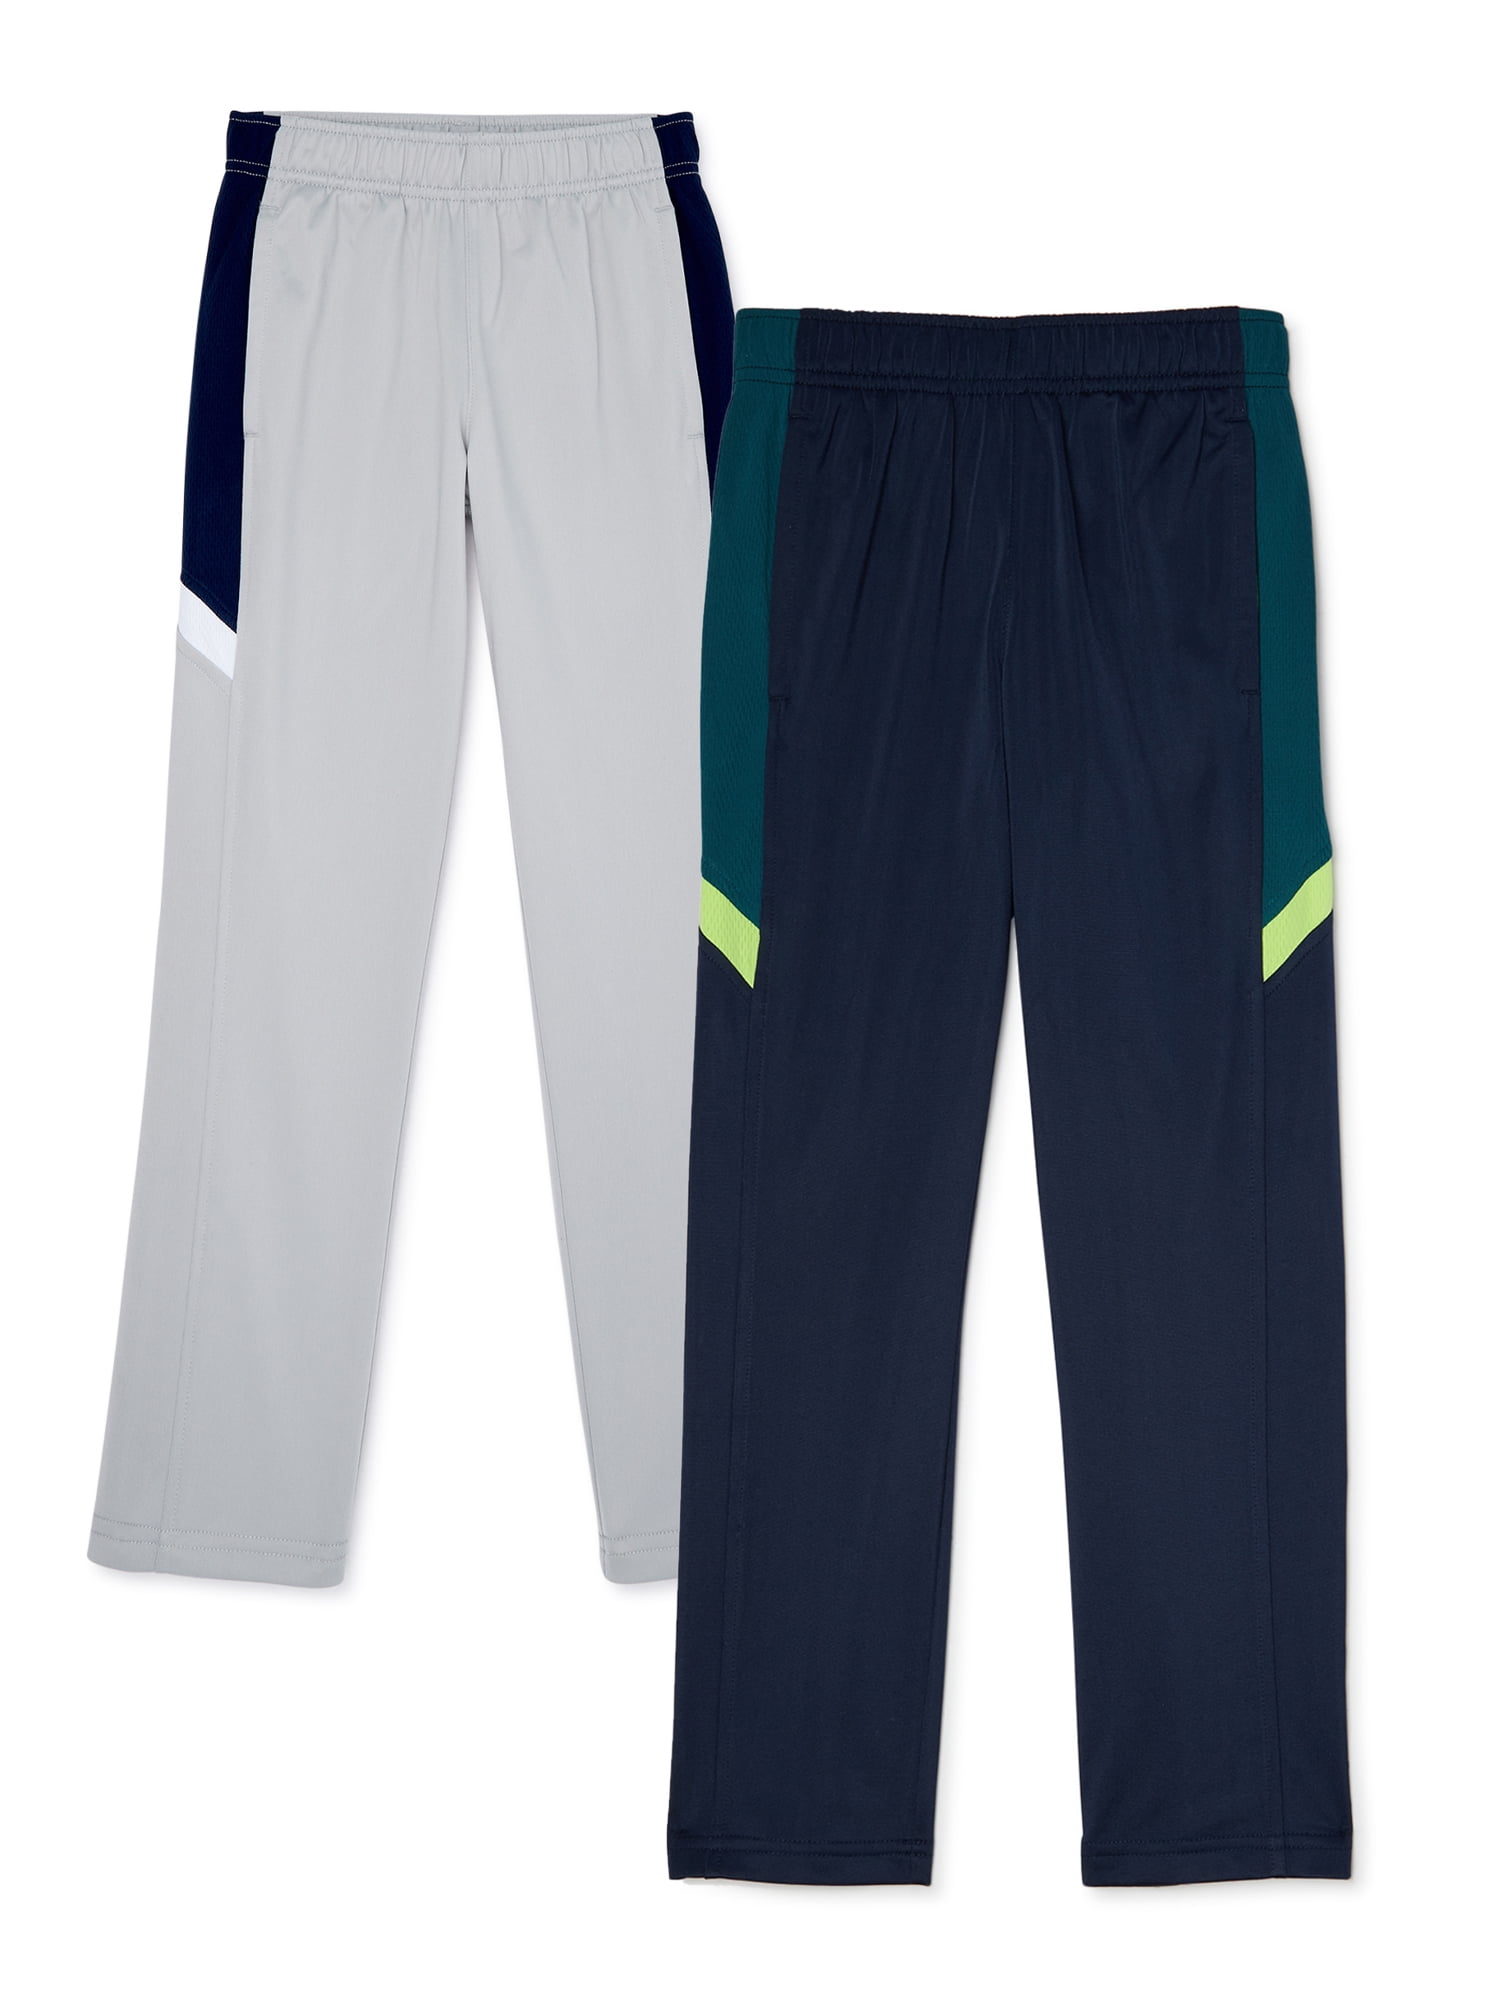 Size Medium - 8 Blue w/ green NWT Boys Atheltic Works Tricot Track Pants 